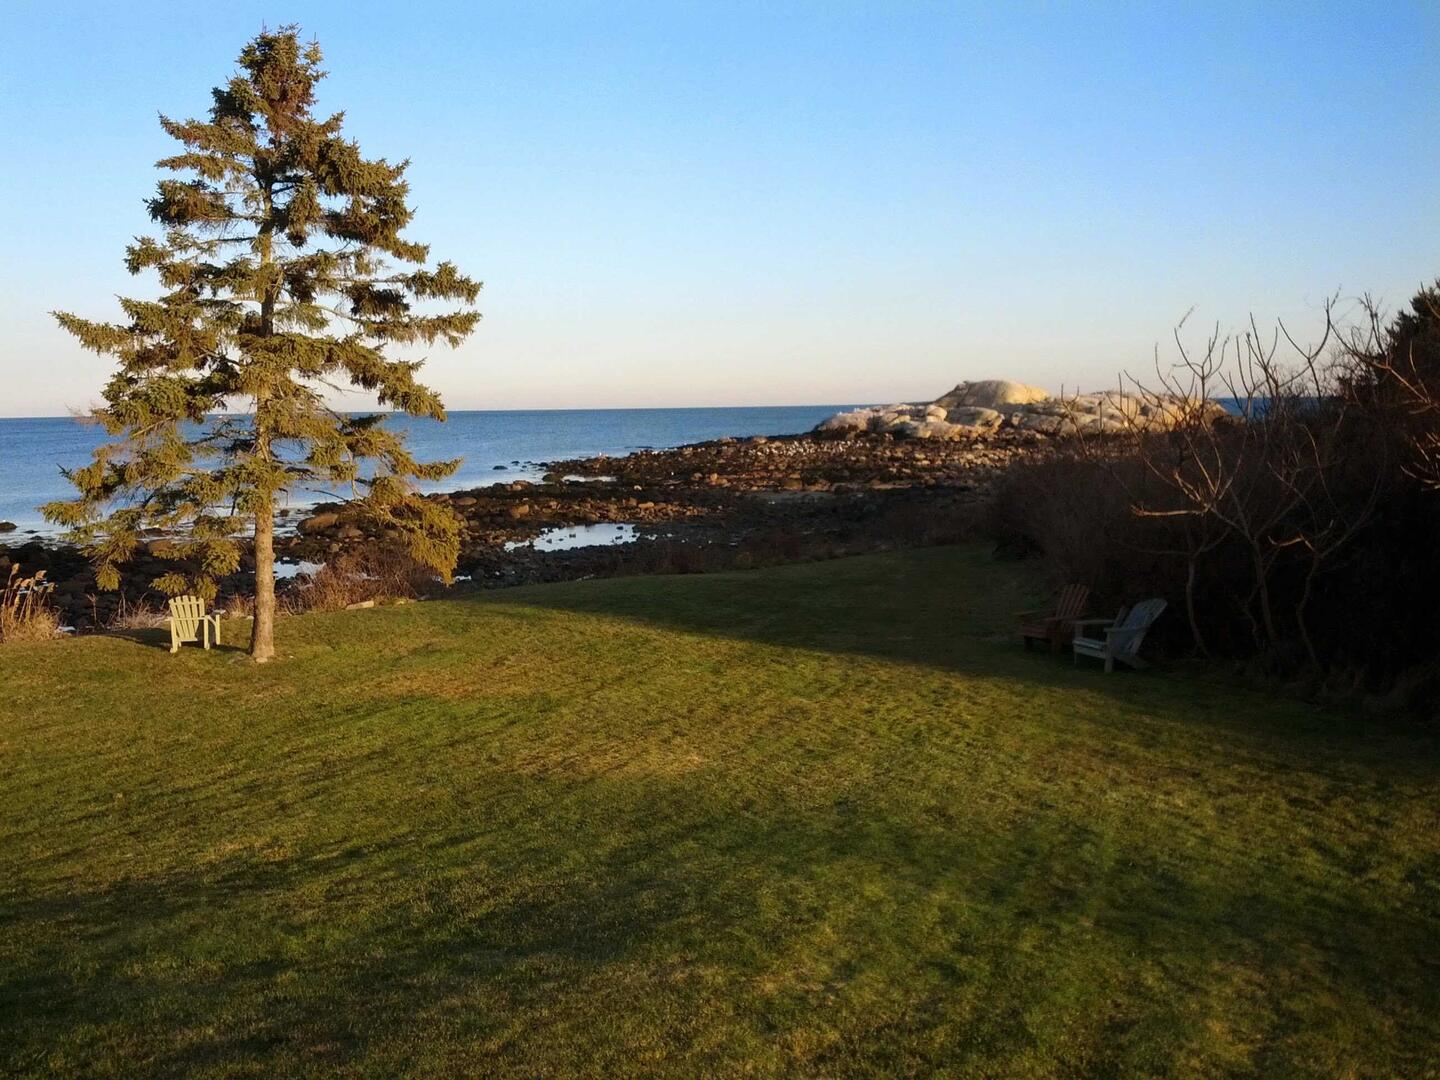 View of the Atlantic from the Eastern Point Retreat House in Gloucester, Mass. (Photo by author)